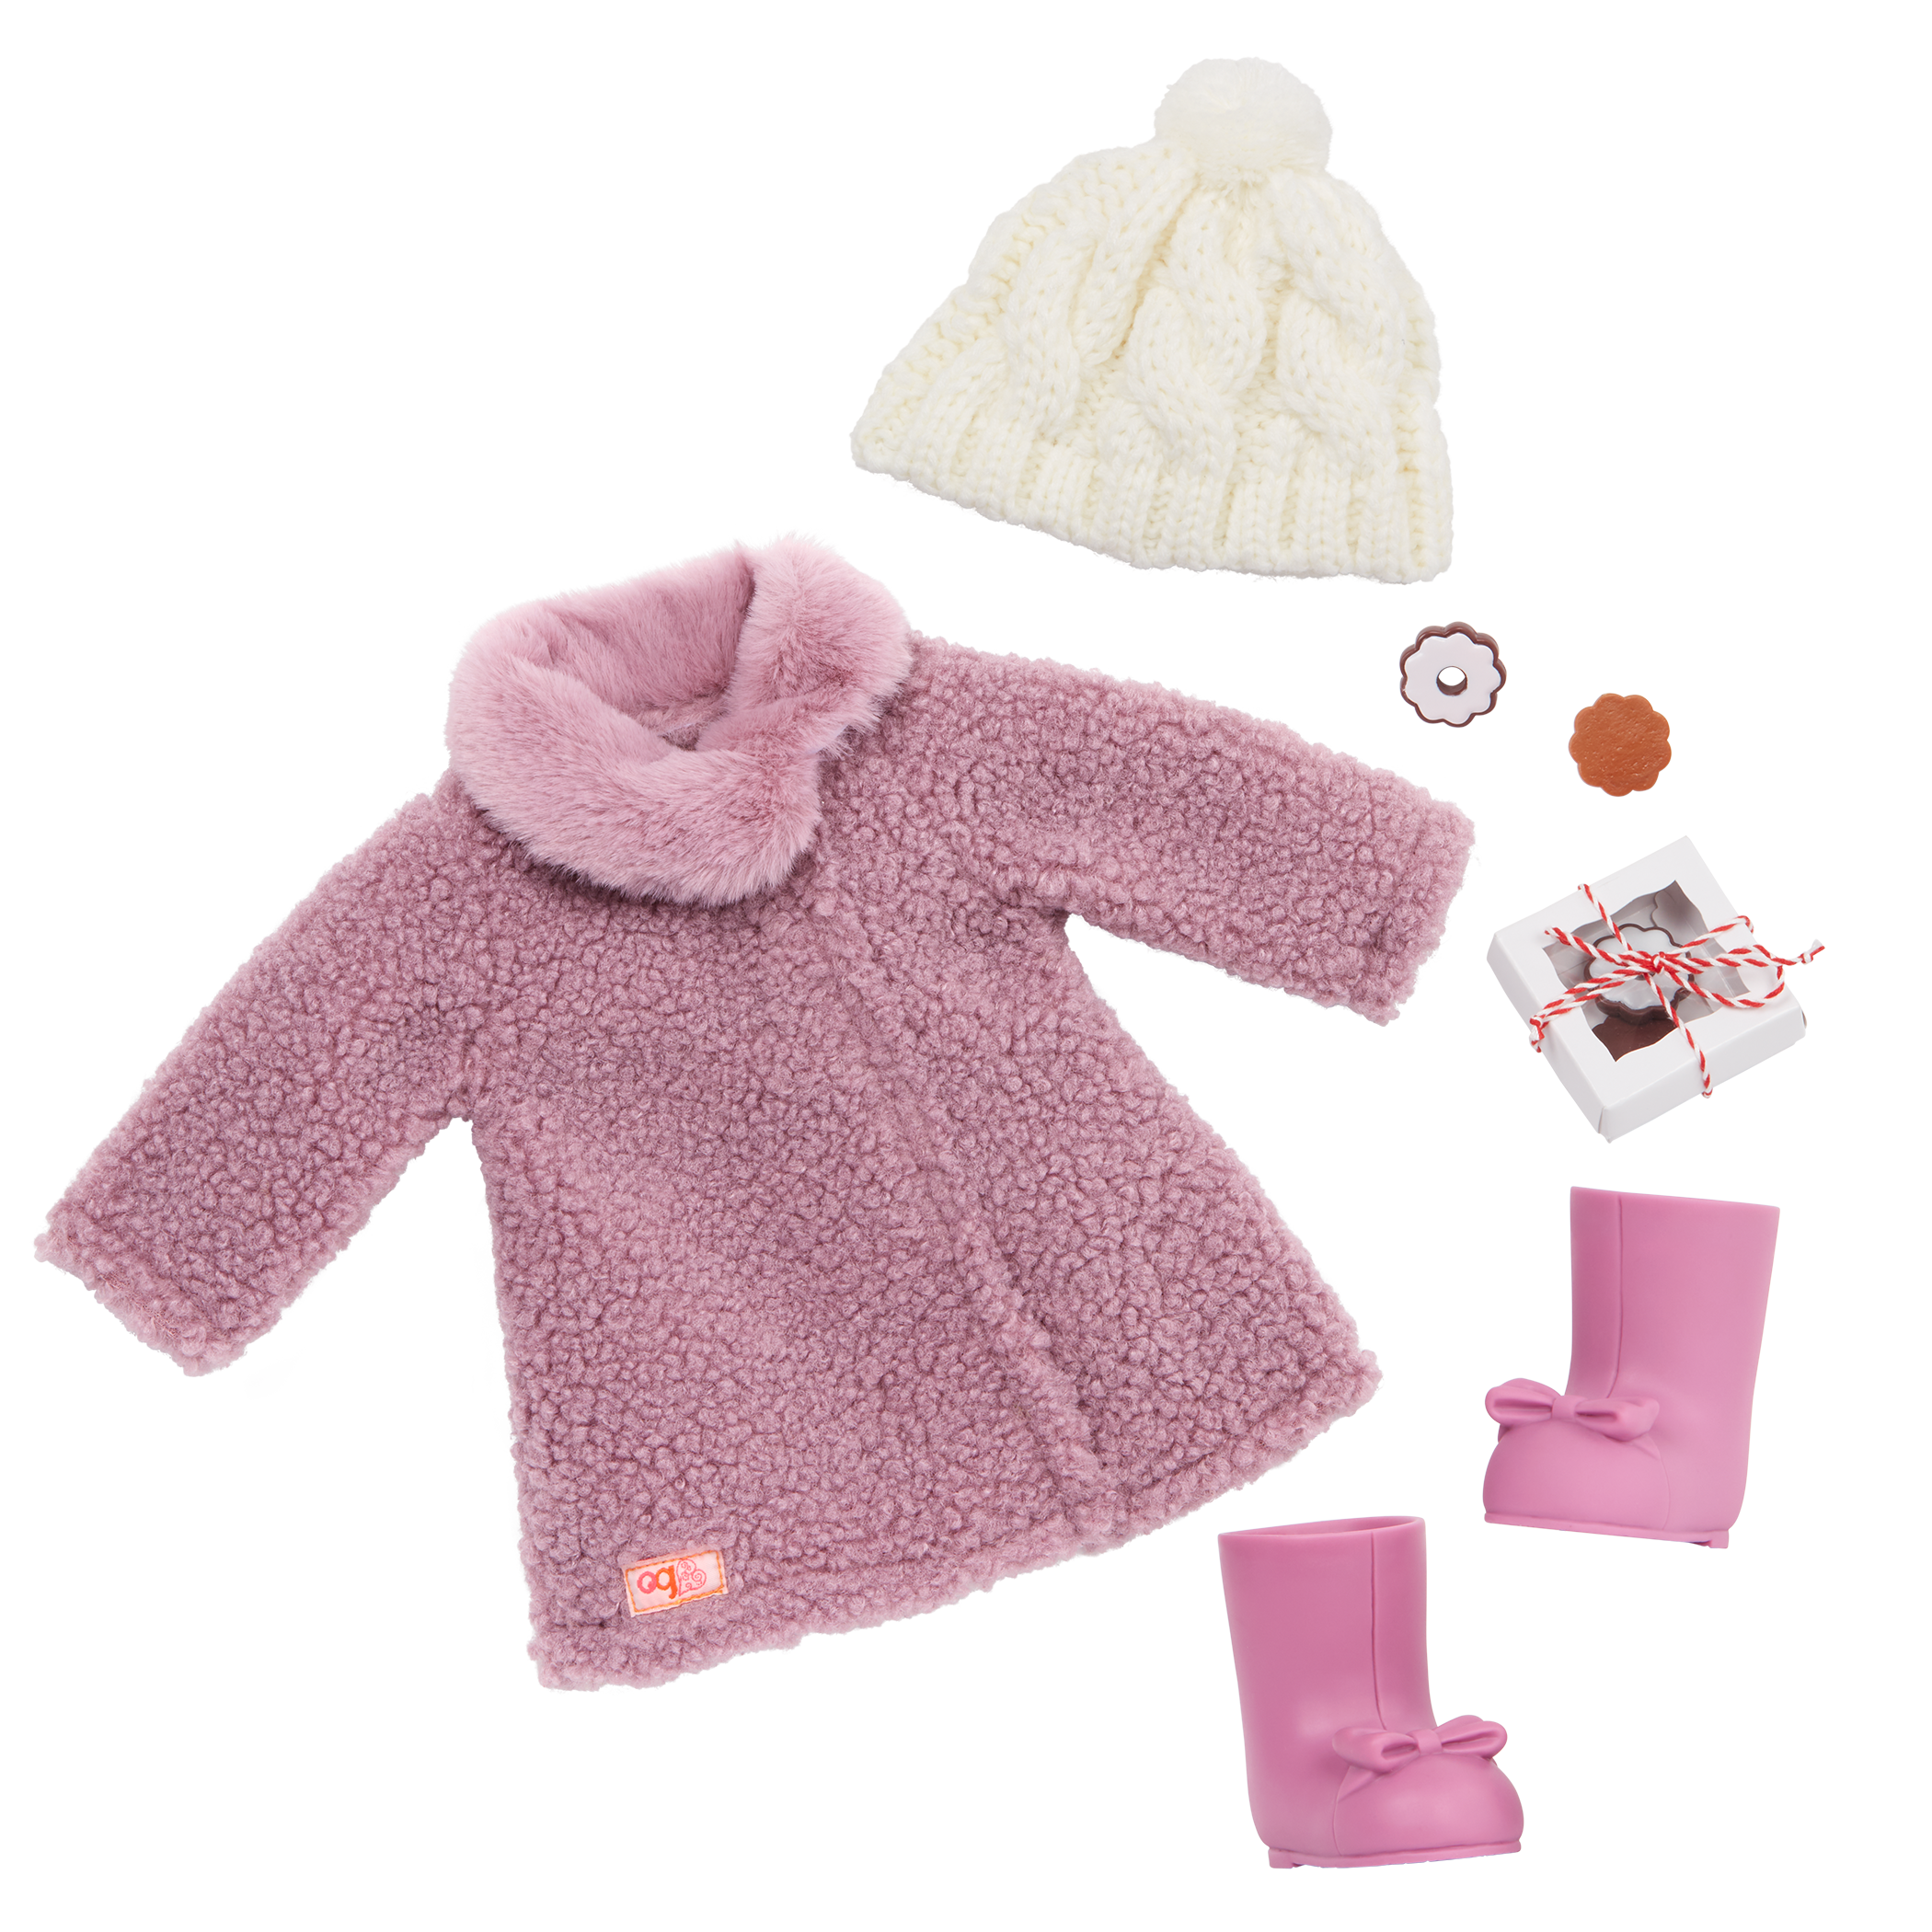 Our Generation Wonderfully Warm Coat Outfit for 18-inch Dolls